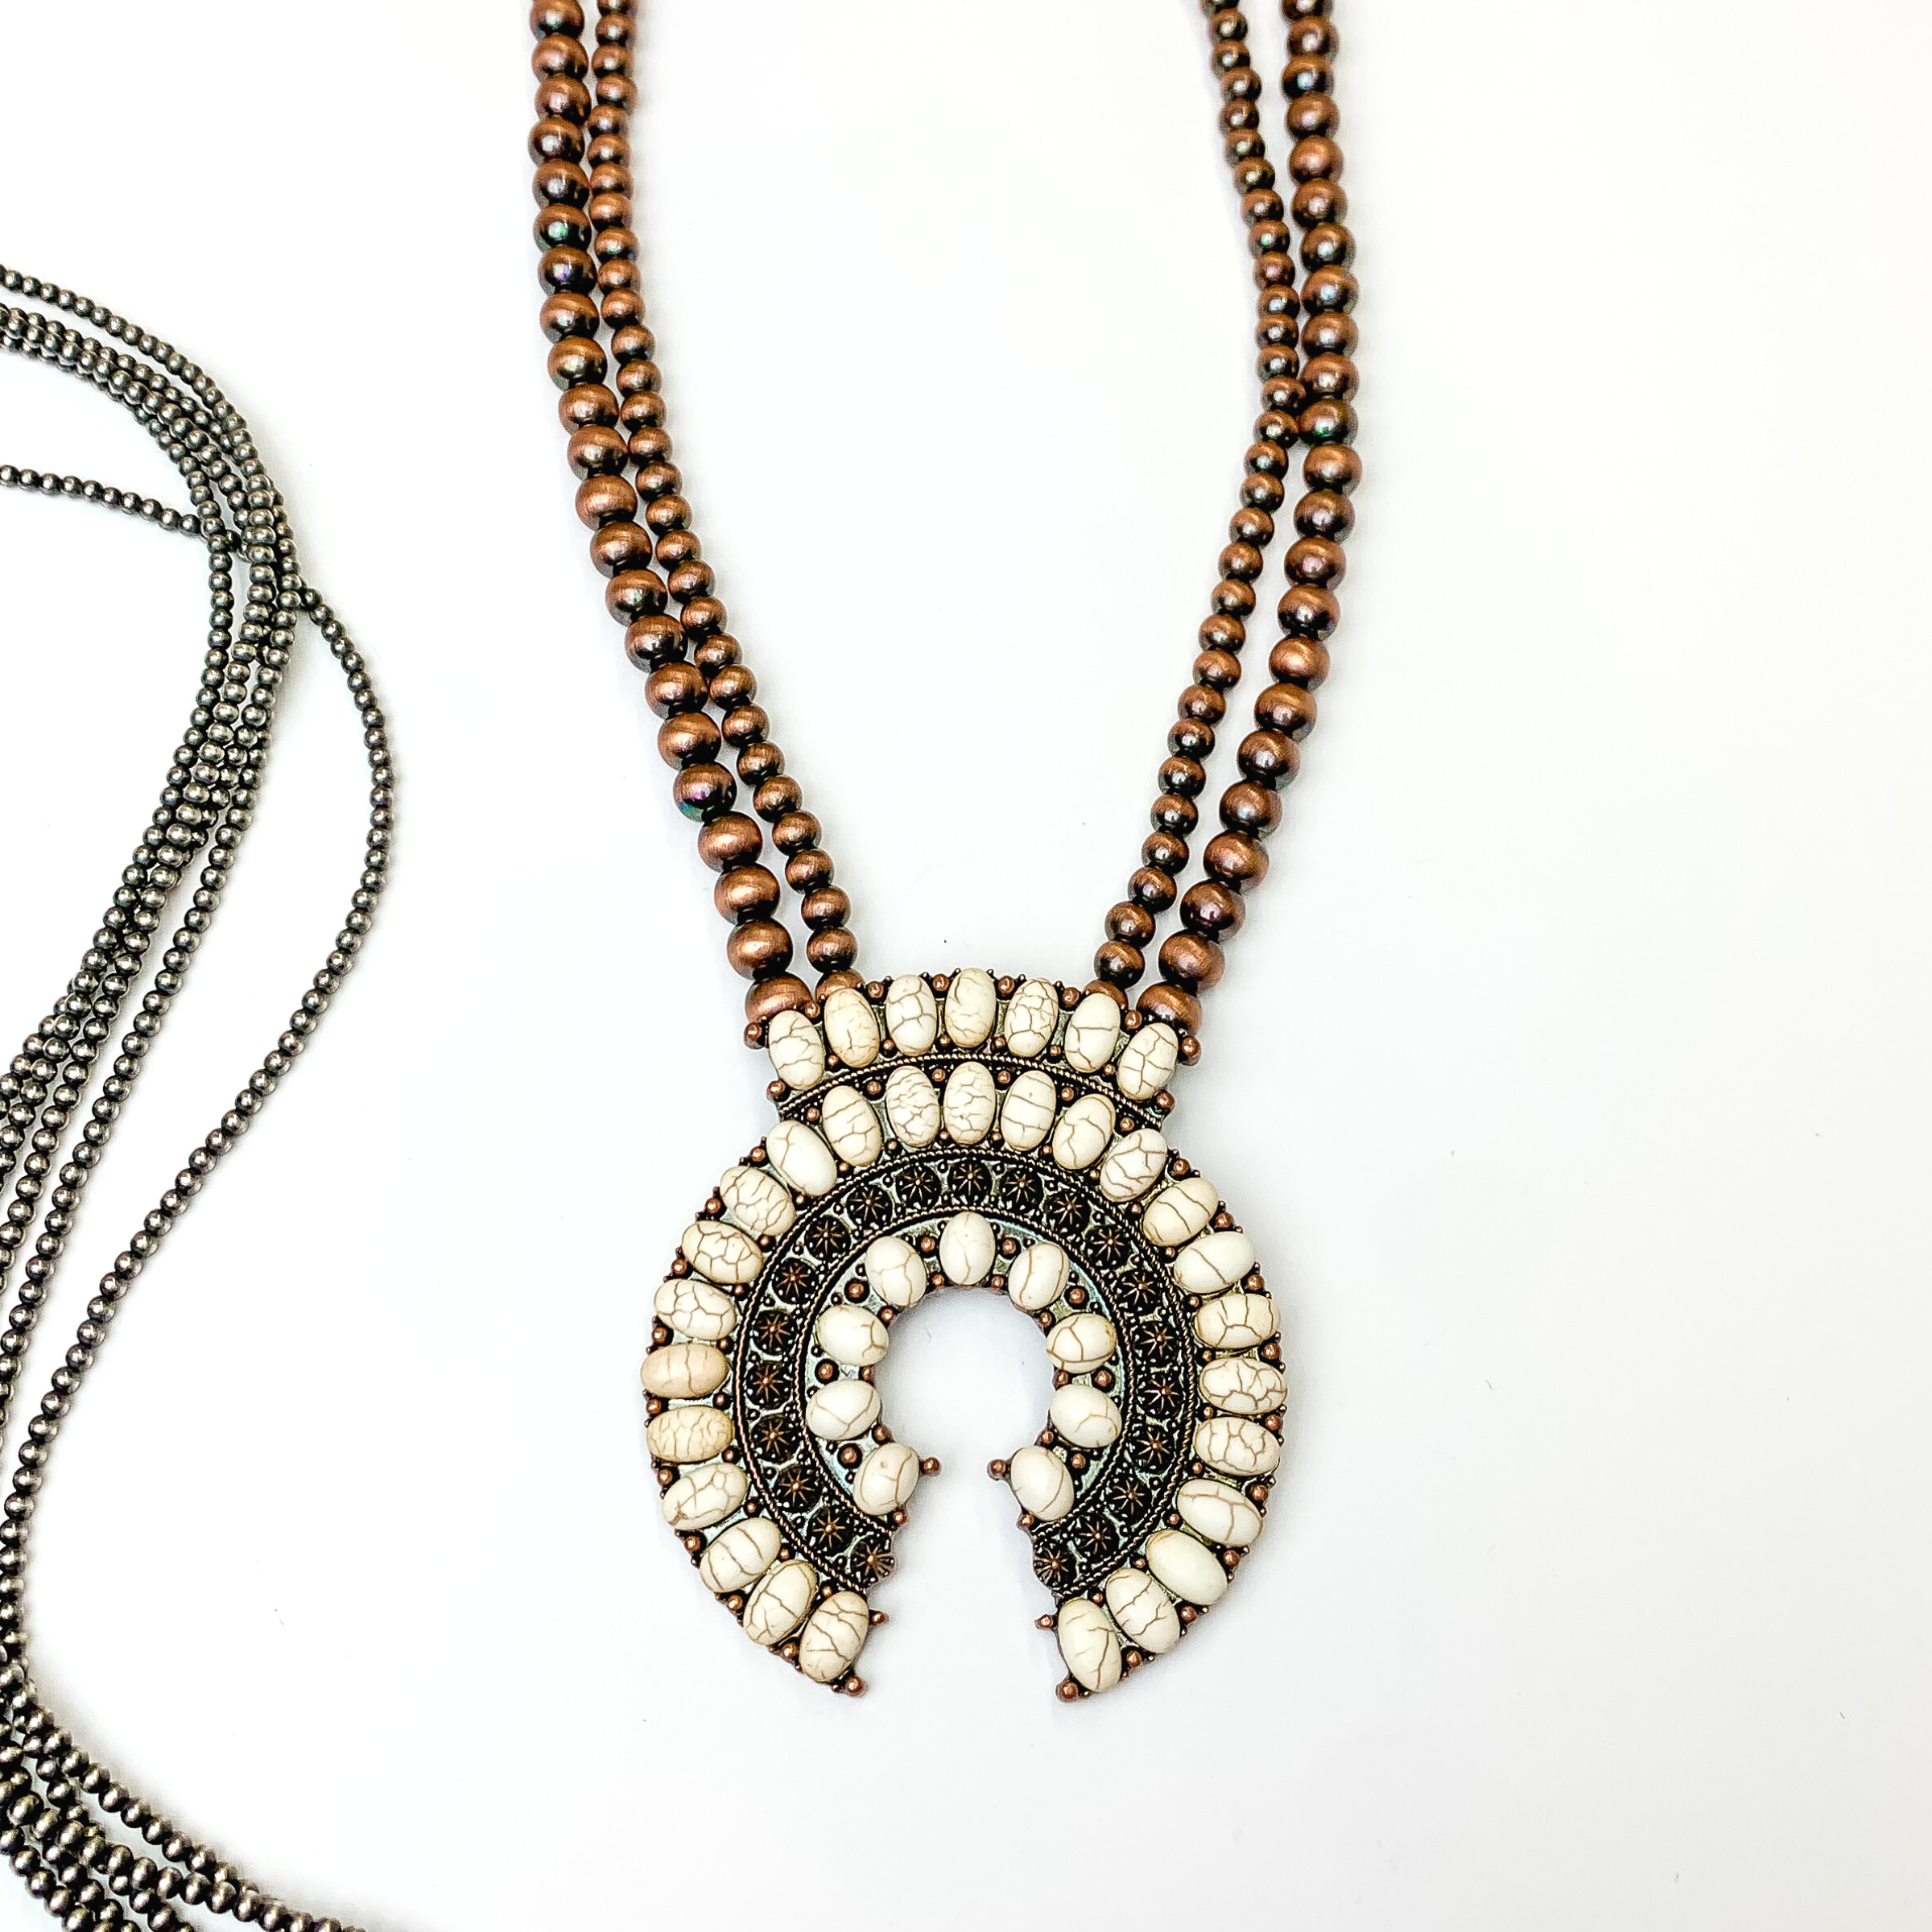 This copper beaded double strand necklace with copper naja pendant and ivory stones covering it. This necklace is pictured on a white background with silver beads on the left side of the picture.   